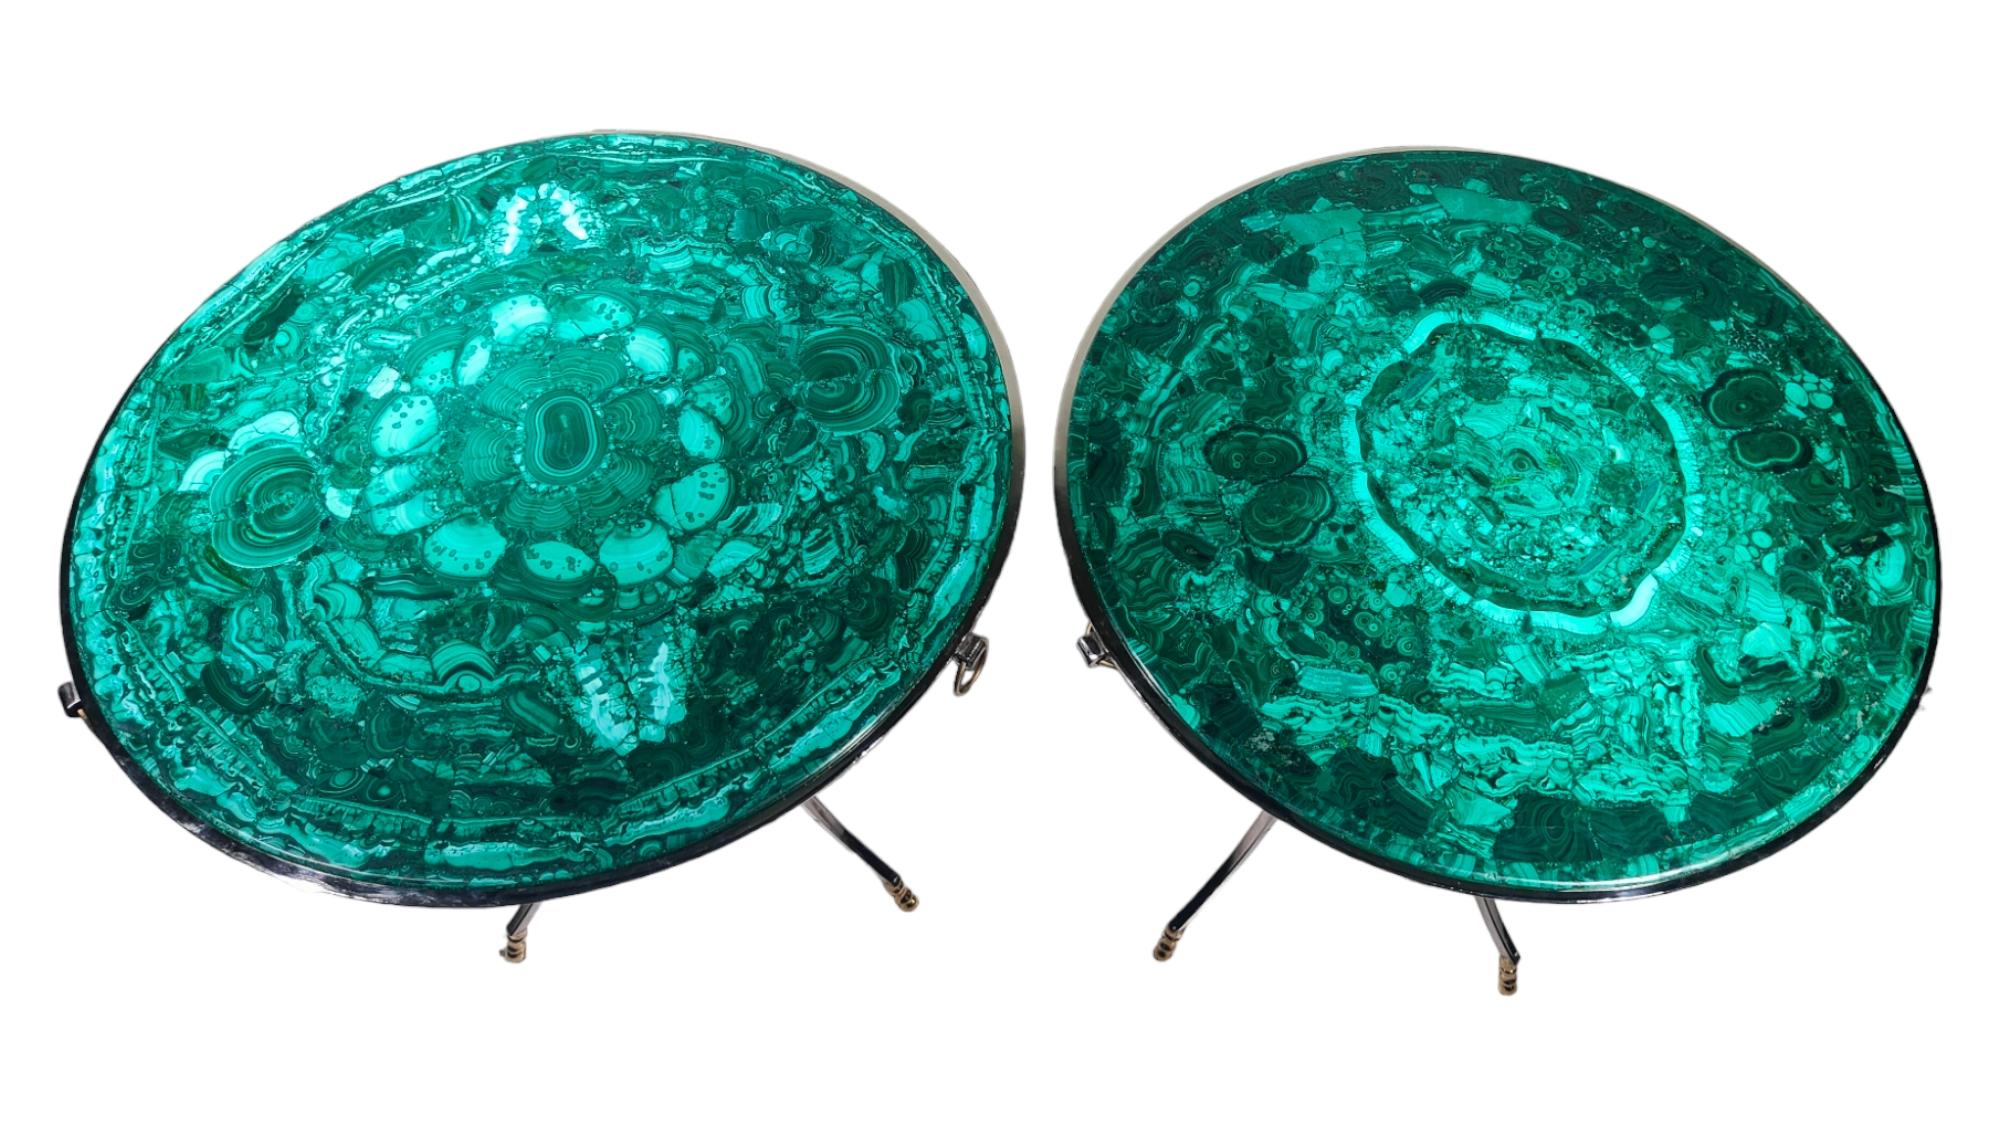 Pair Of Italian Malachite Tables
Elegant Malachite Tables Made in Italy in the 1950s - Premium Triple A Quality Malachite. Malachite is a semi-precious stone used in jewelry. The structure of the table is in polished steel and bronze legs.